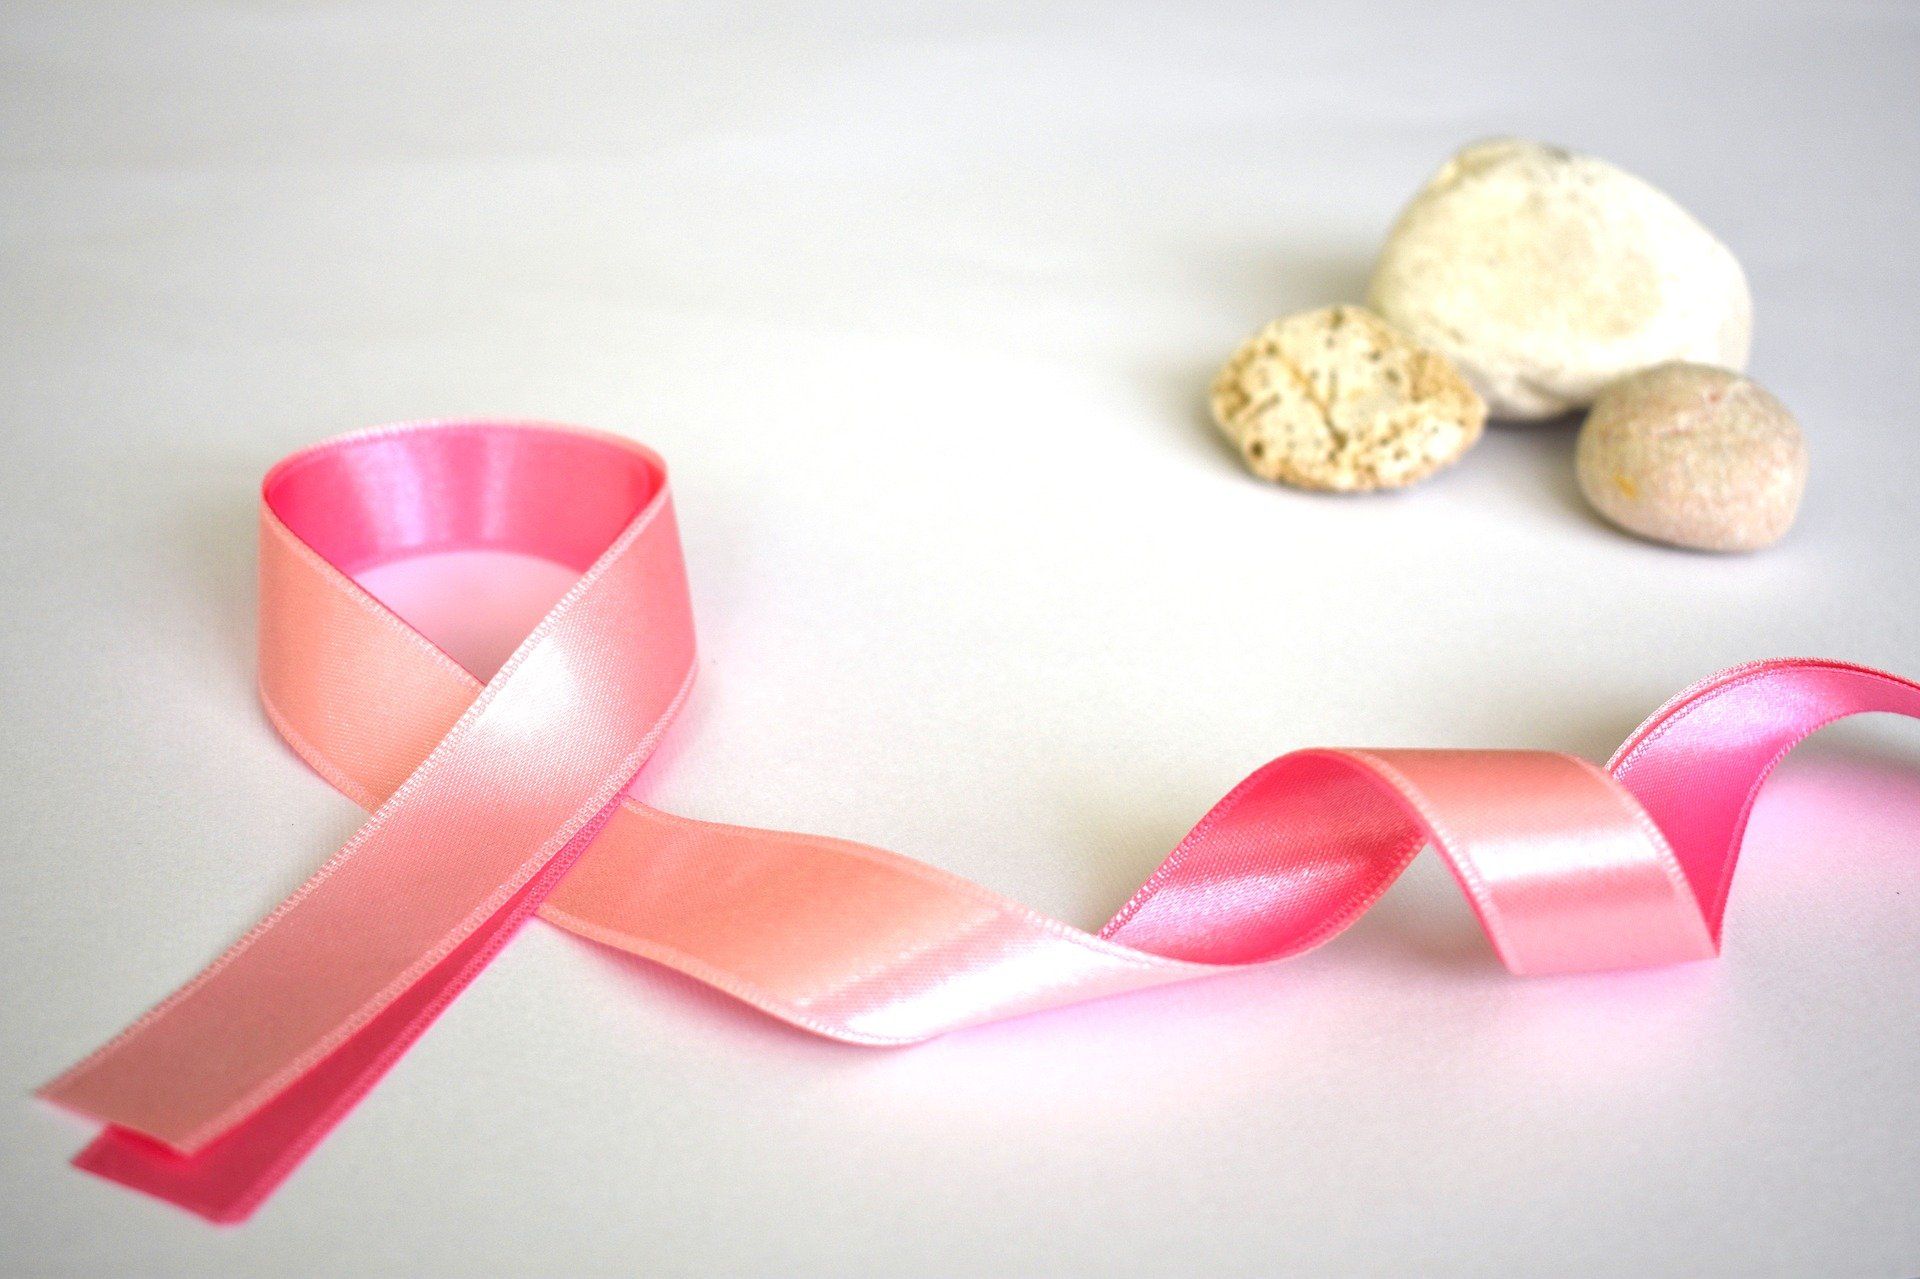 Study finds new predictors of breast cancer relapse